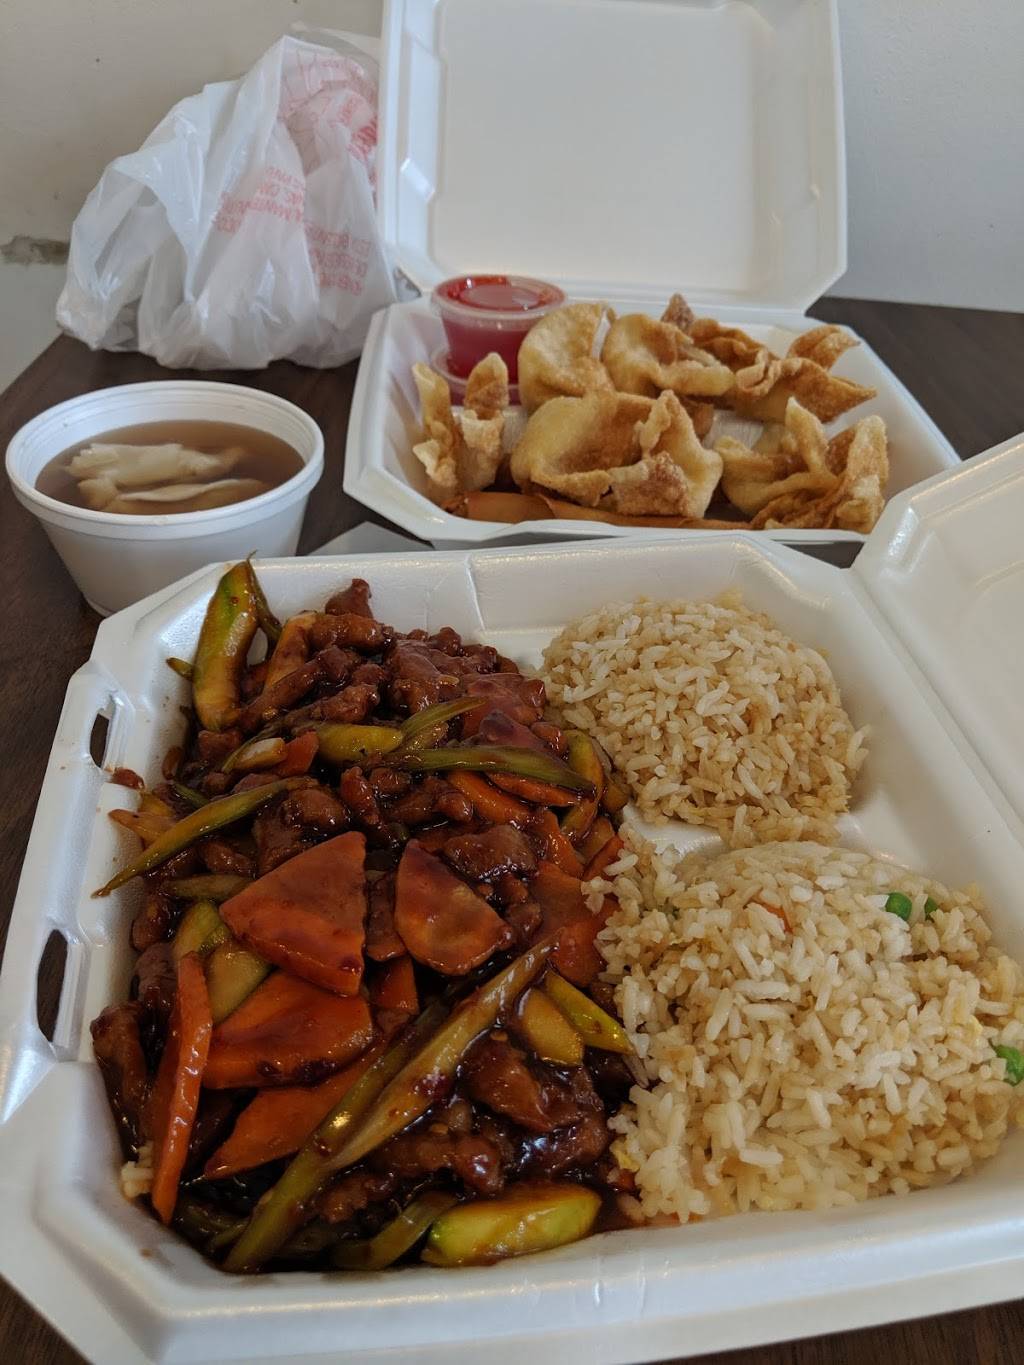 Asian Chef Jasmine Garden Meal Delivery 1612 N College Ave